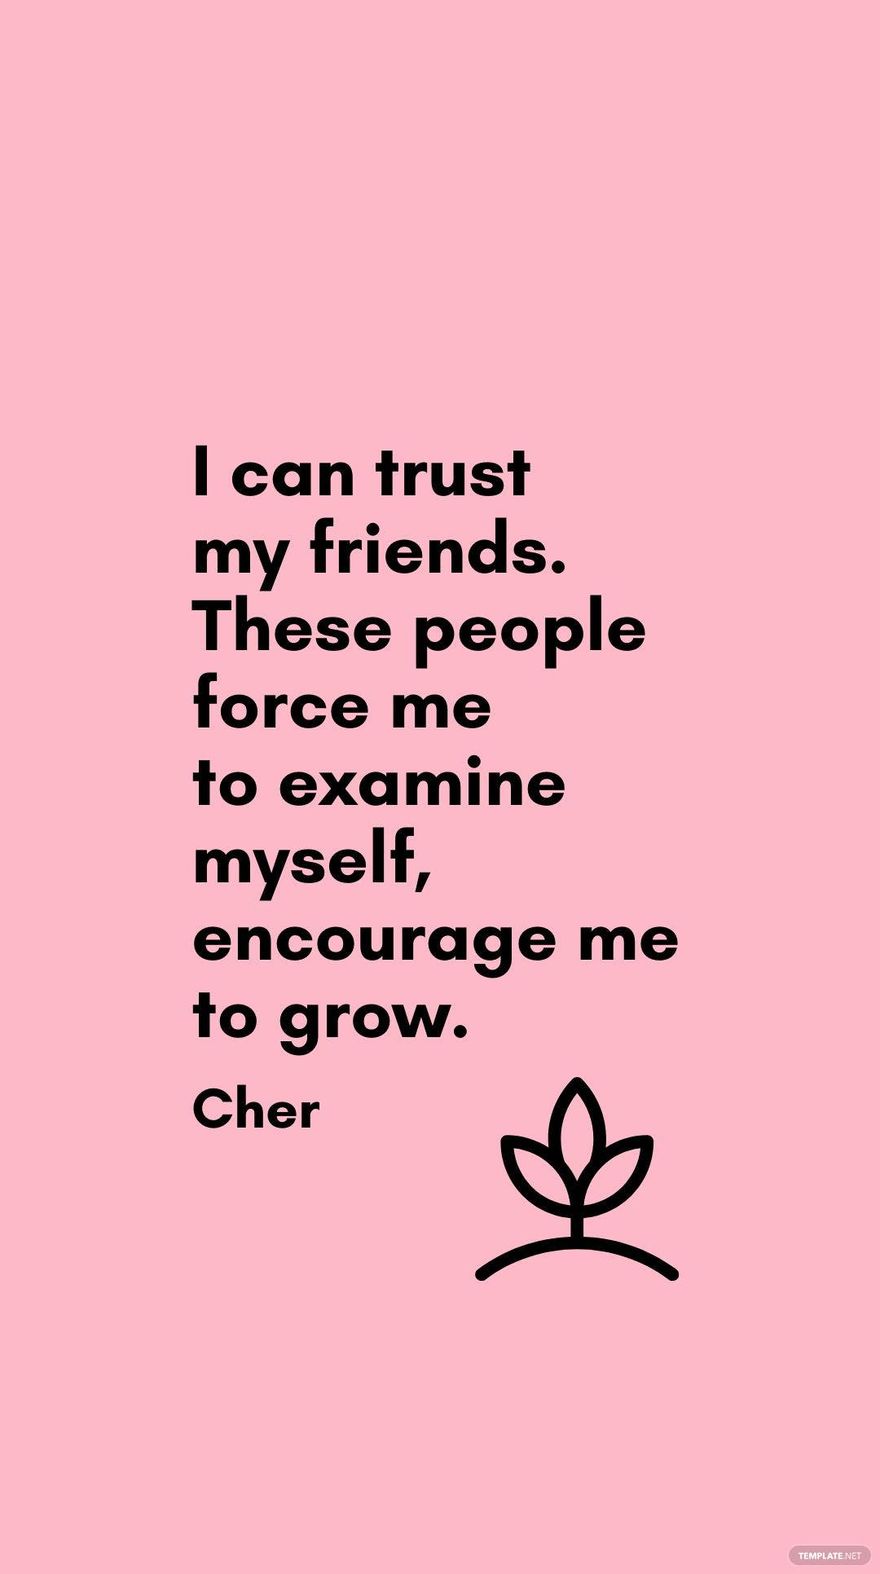 Free Cher - I can trust my friends. These people force me to examine myself, encourage me to grow.